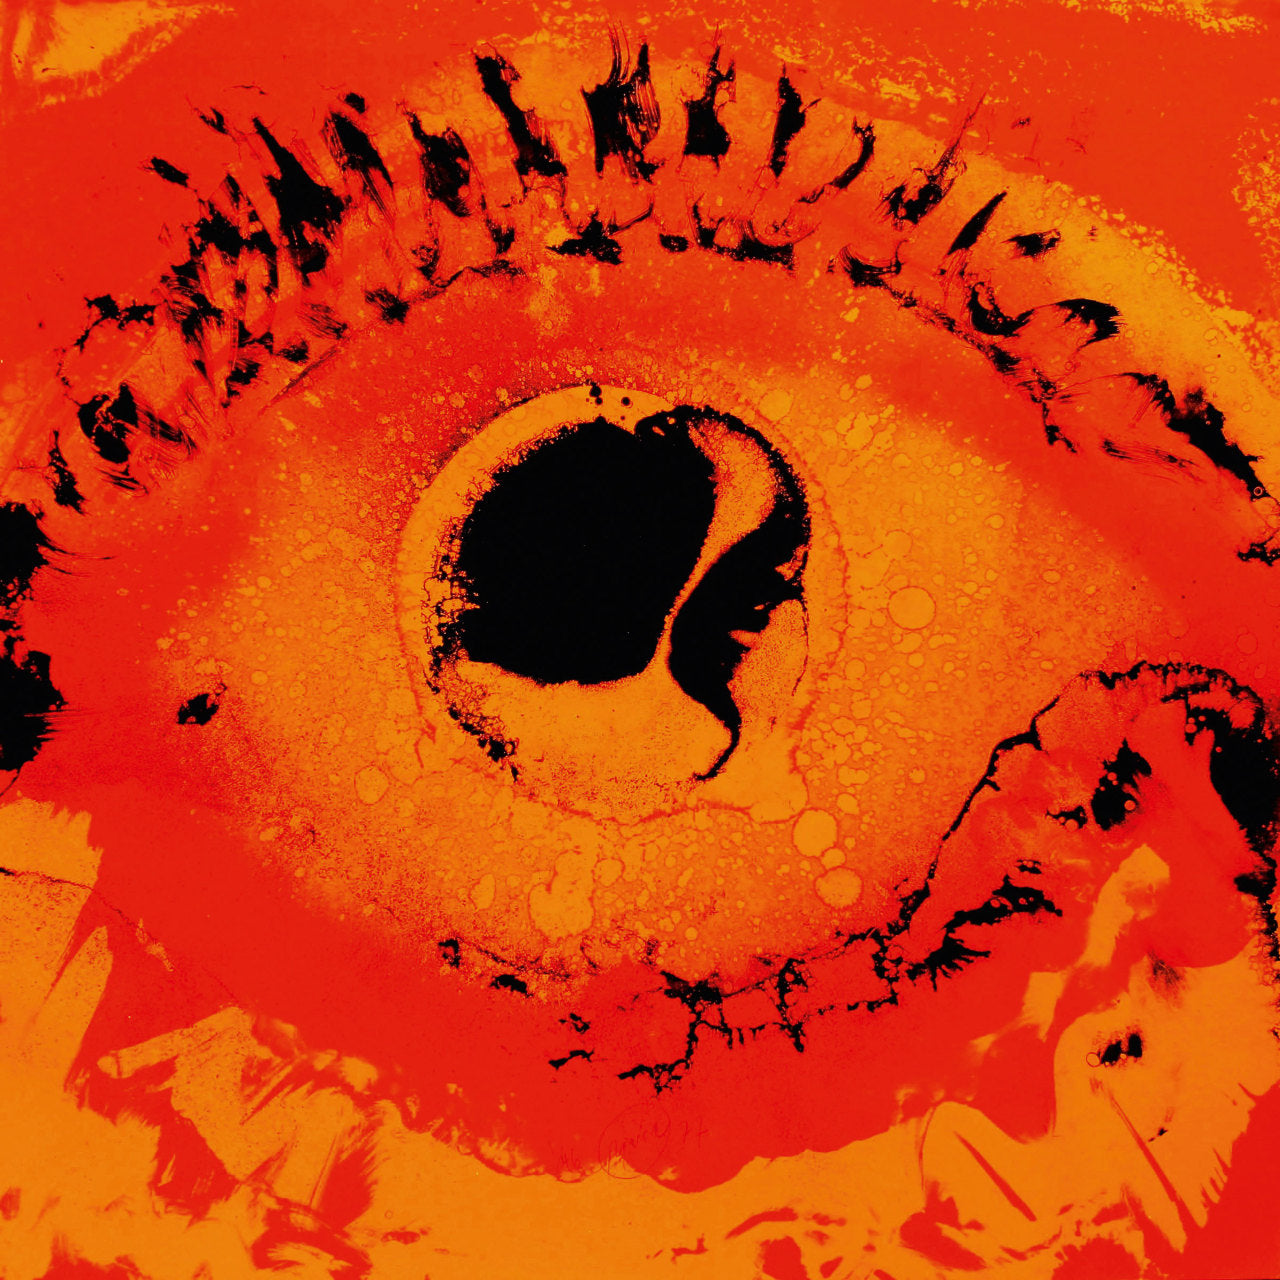 abstract close up image of an eye in bright orange, red and black by Otto piene